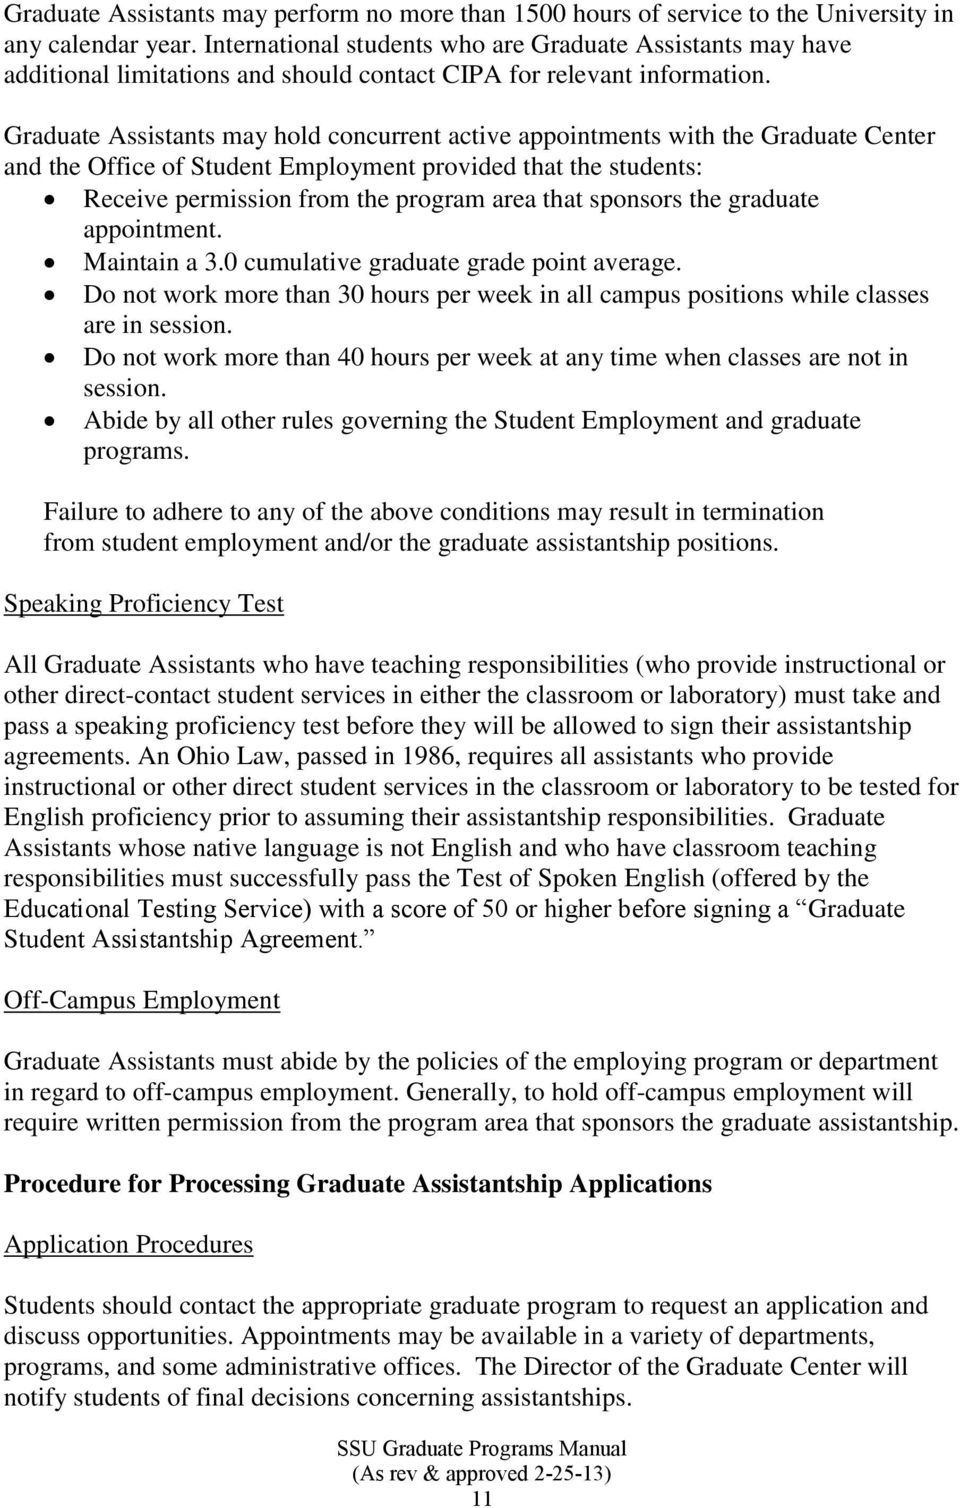 Graduate Assistants may hold concurrent active appointments with the Graduate Center and the Office of Student Employment provided that the students: Receive permission from the program area that